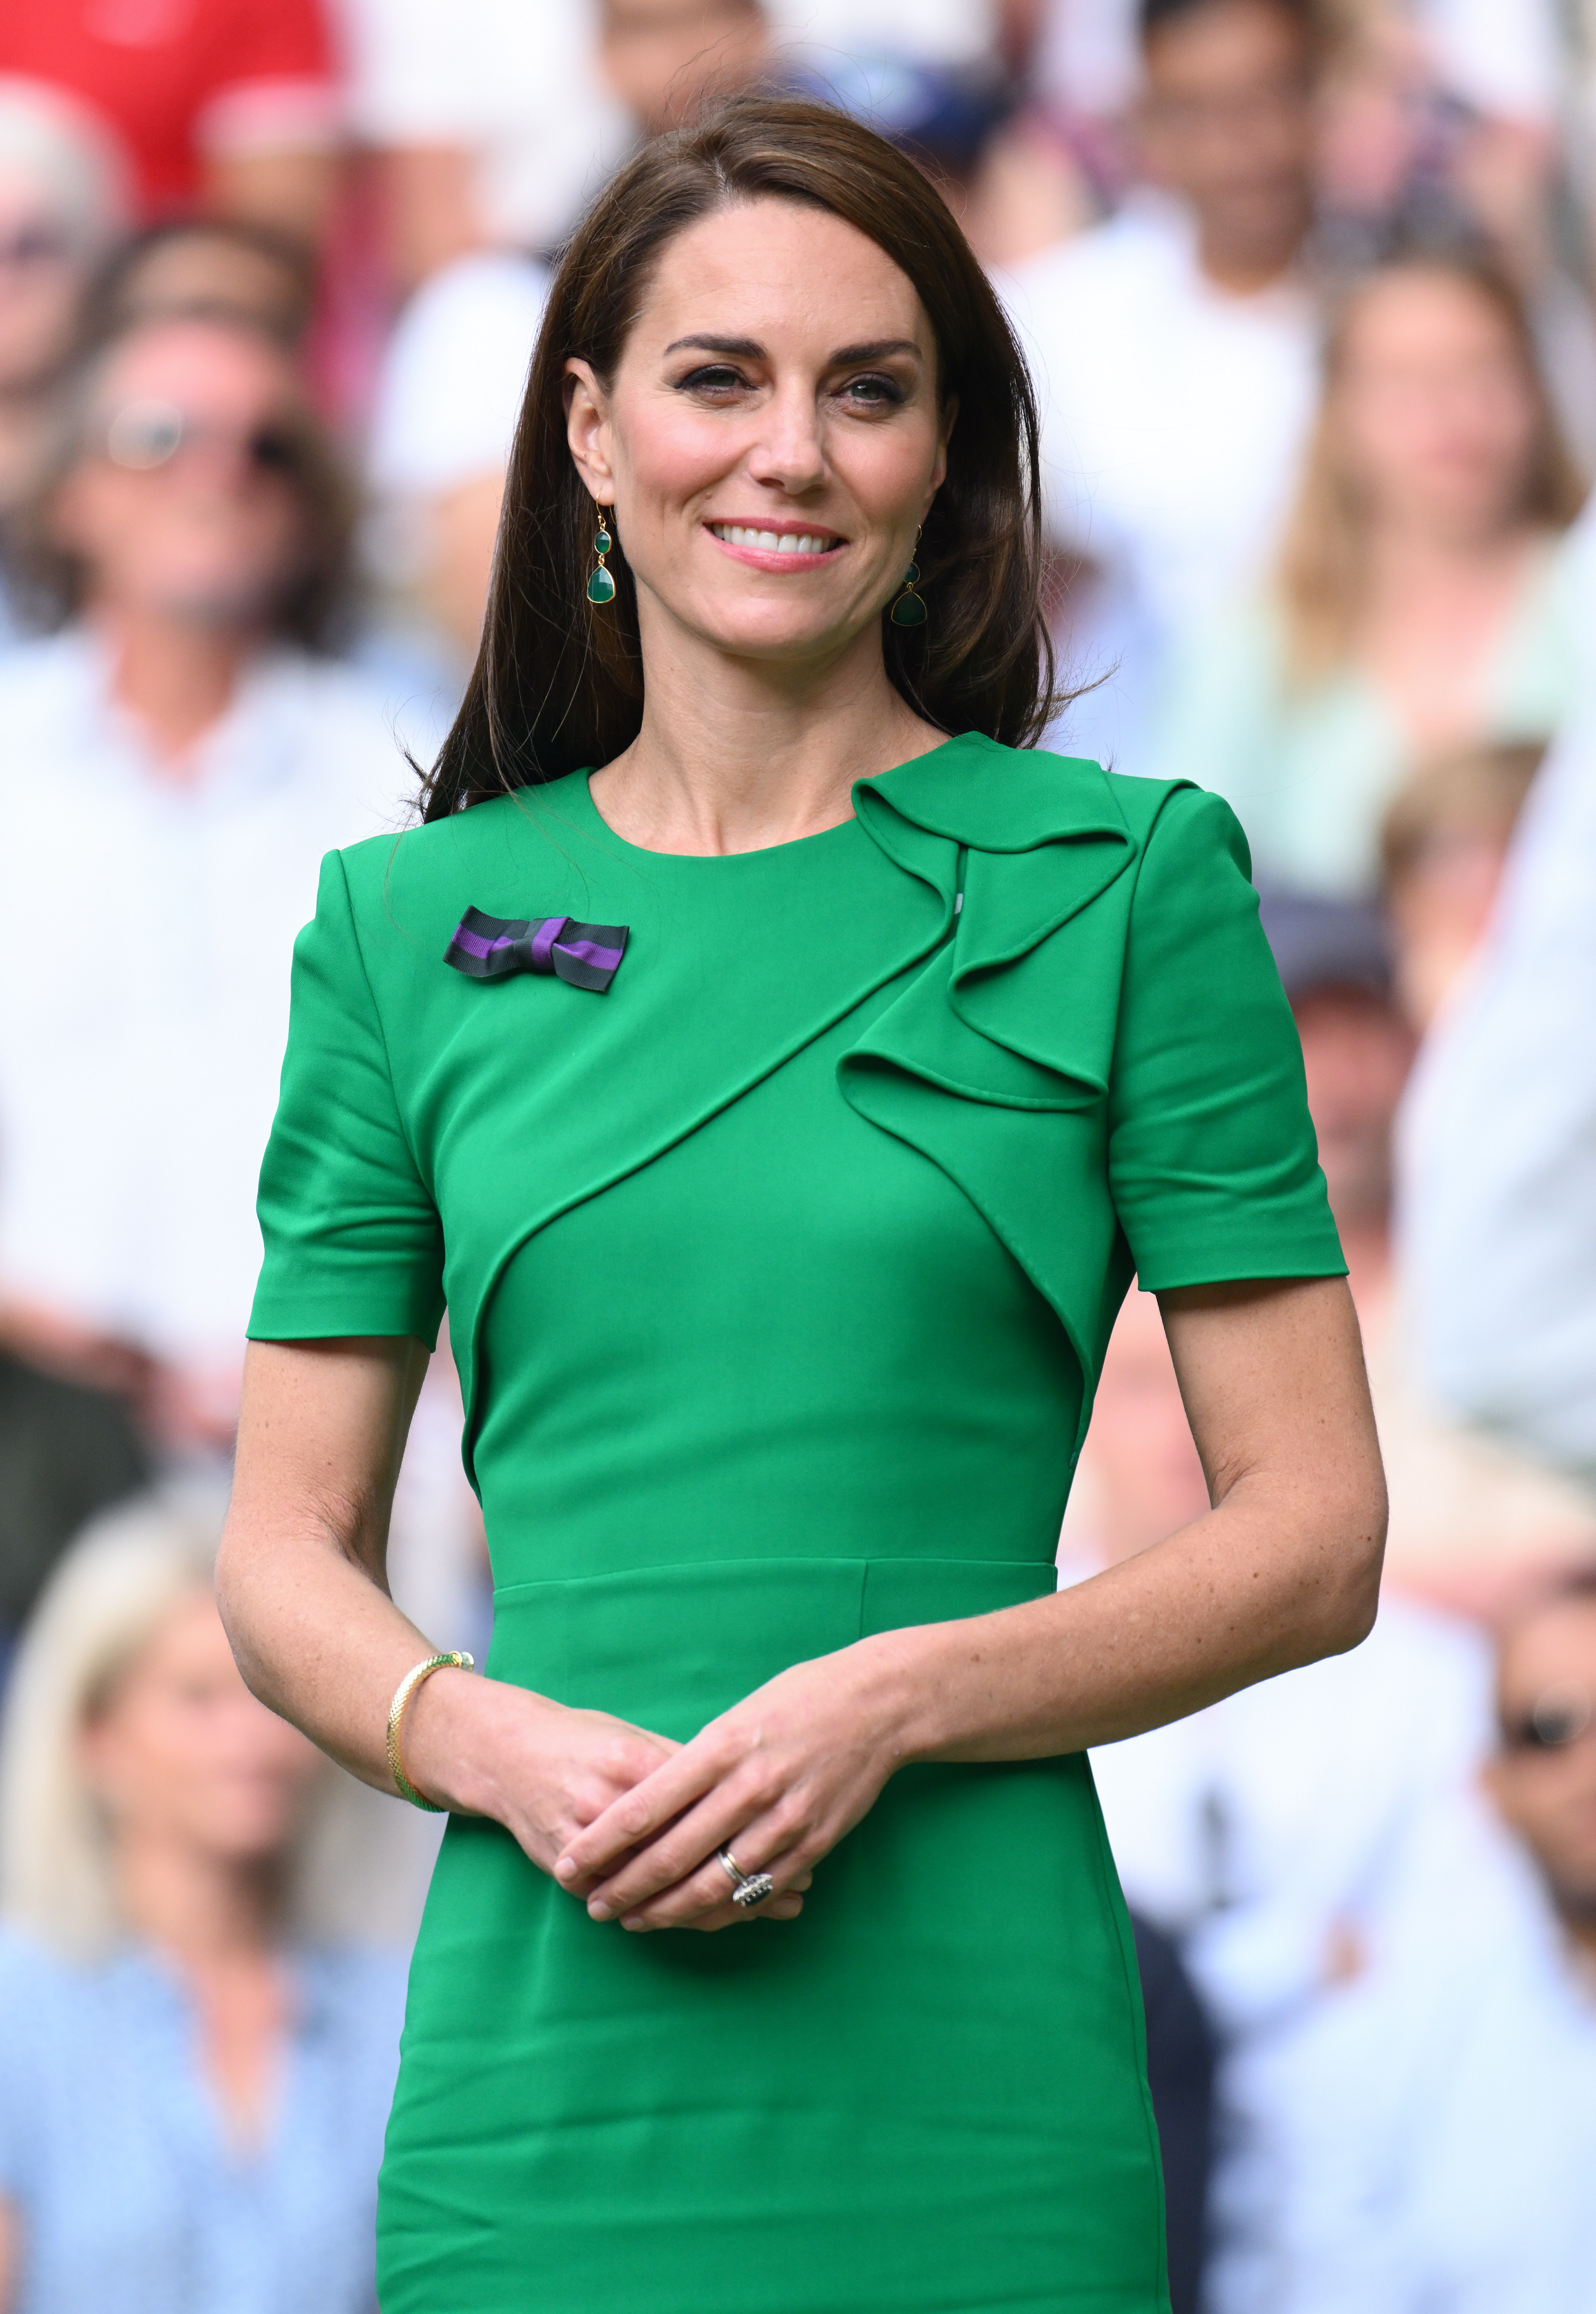 Catherine, Princess of Wales watches Carlos Alcaraz vs Novak Djokovic in the Wimbledon men's final during the Wimbledon Tennis Championships at All England Lawn Tennis and Croquet Club in London, England, on July 16, 2023. | Source: Getty Images